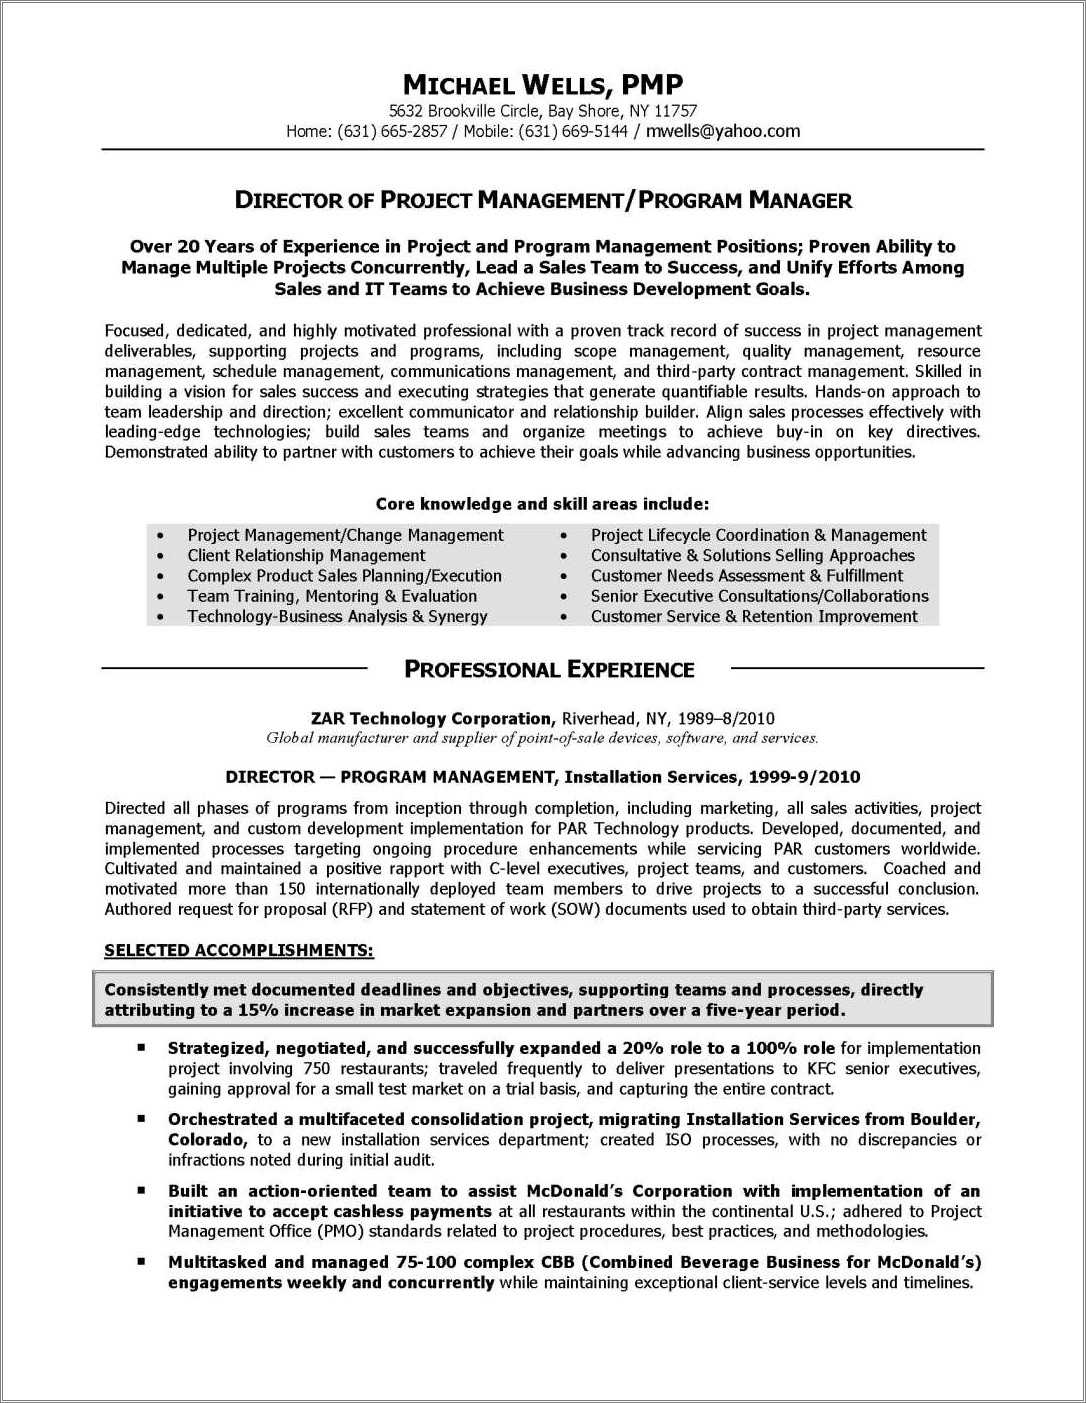 Managed Care Executive Resume Examples